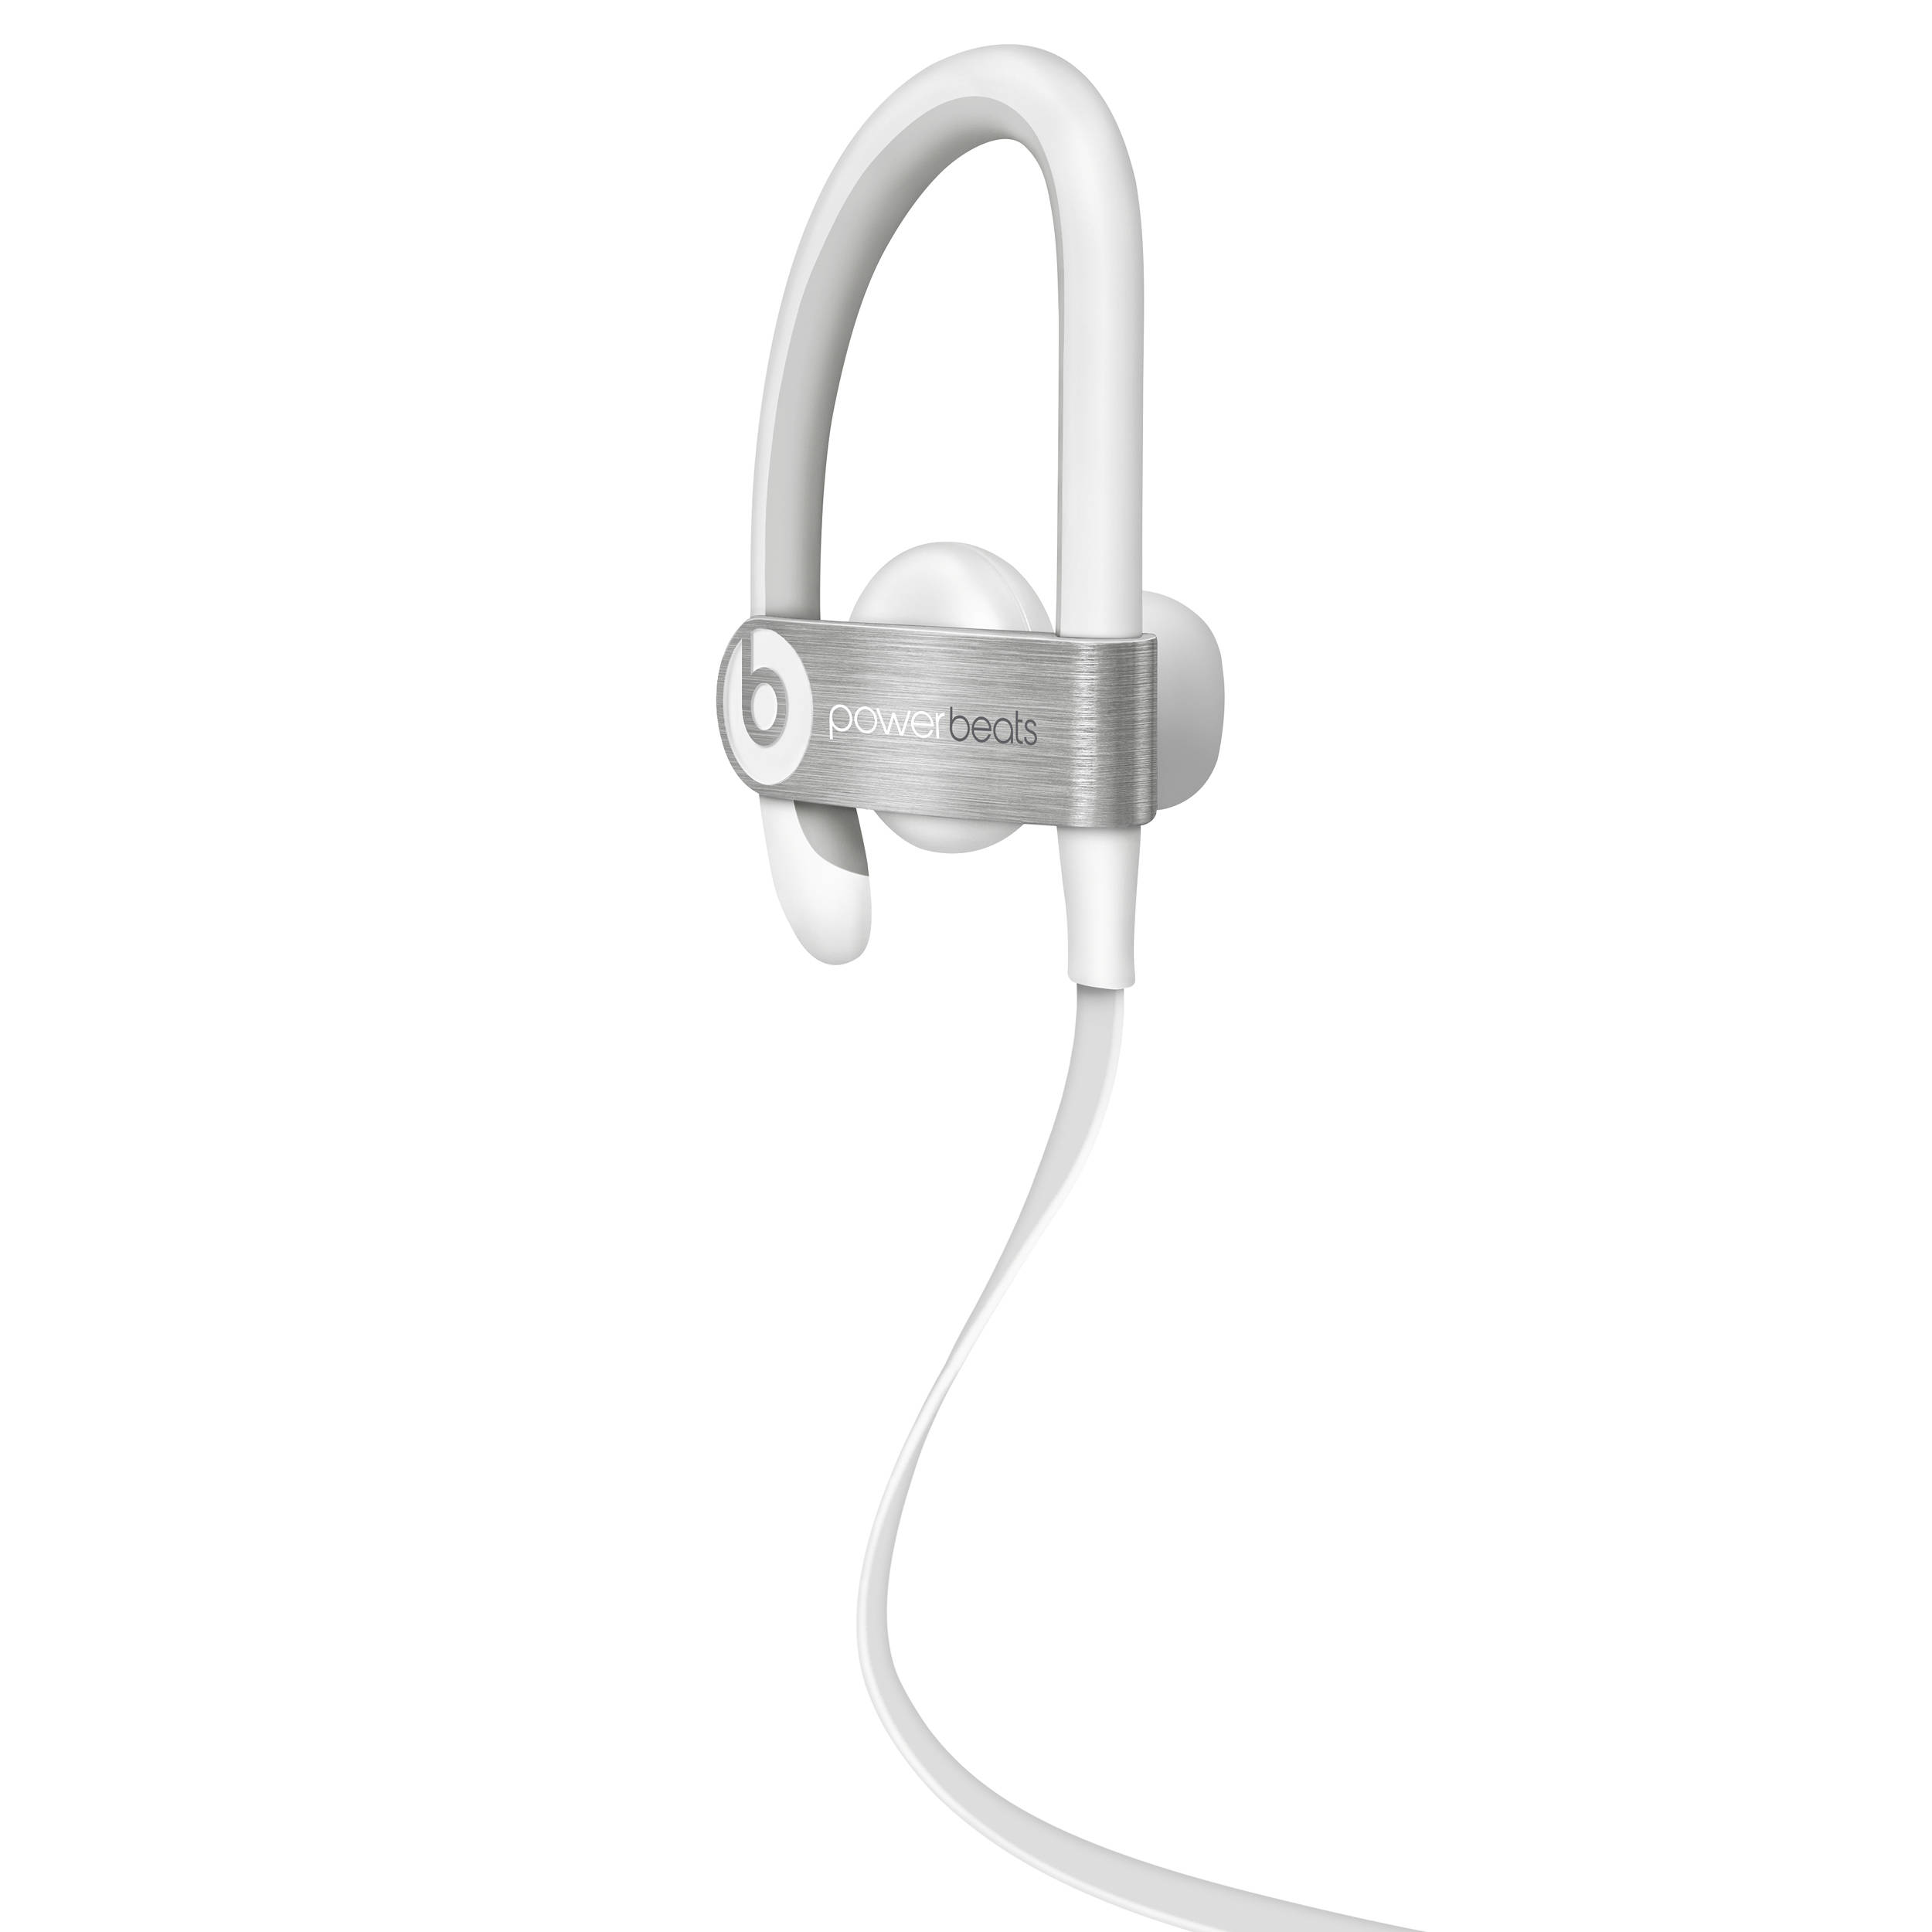 powerbeats wired earbuds